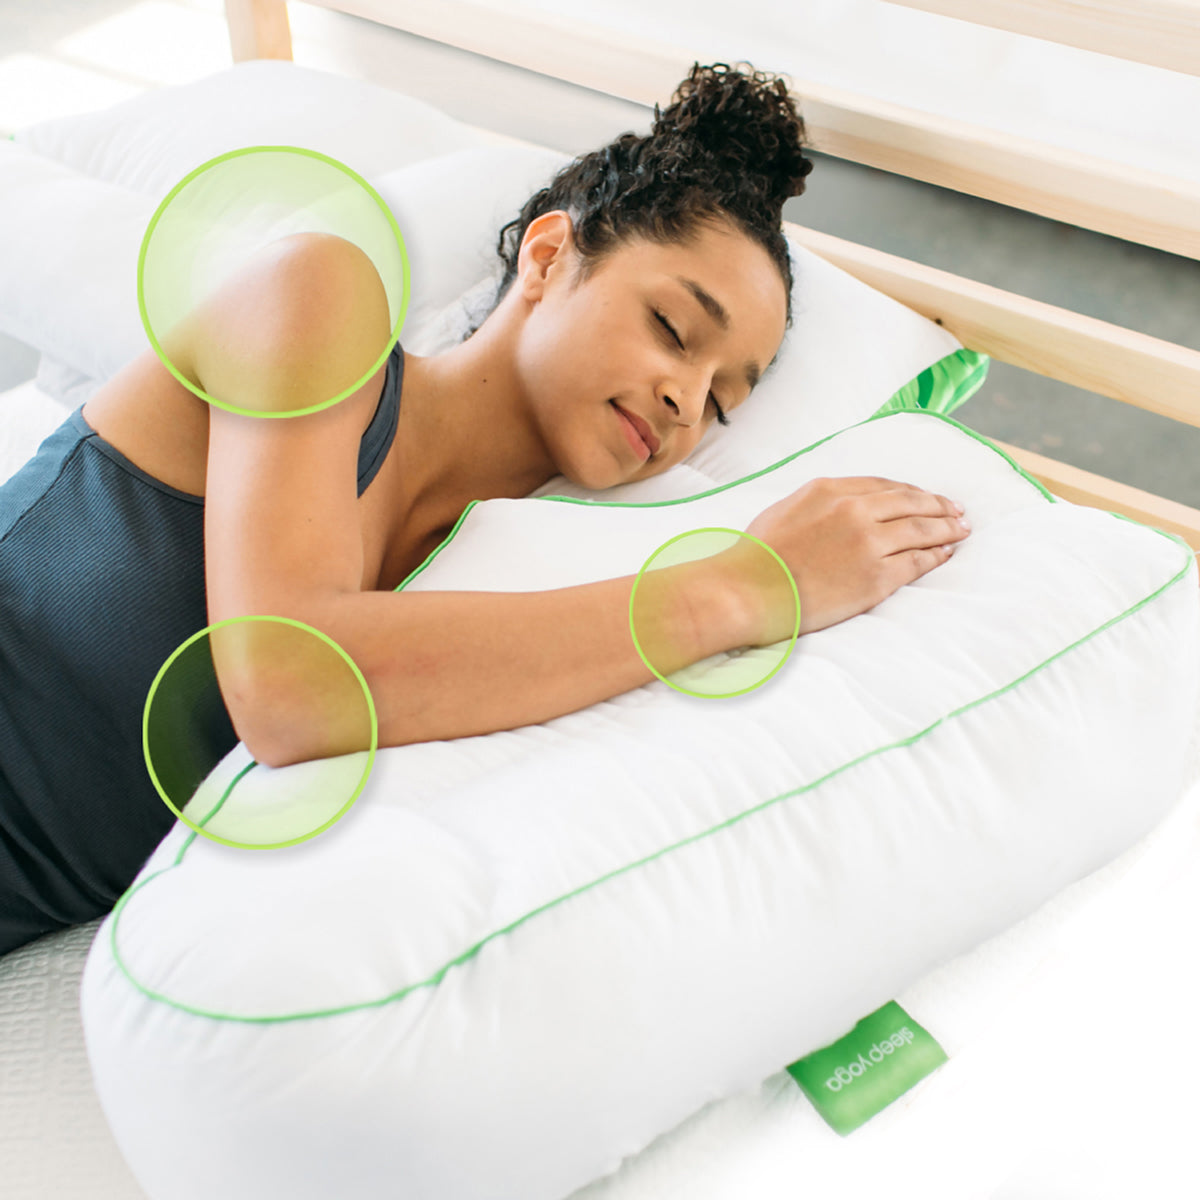  Sleep Yoga Leg Back Side Sleepers, Ergonomically Designed Down  Alternative Pillow for Knee Support, Hypoallergenic & Washable, 26 x 13 x  3/One Size, White : Sports & Outdoors